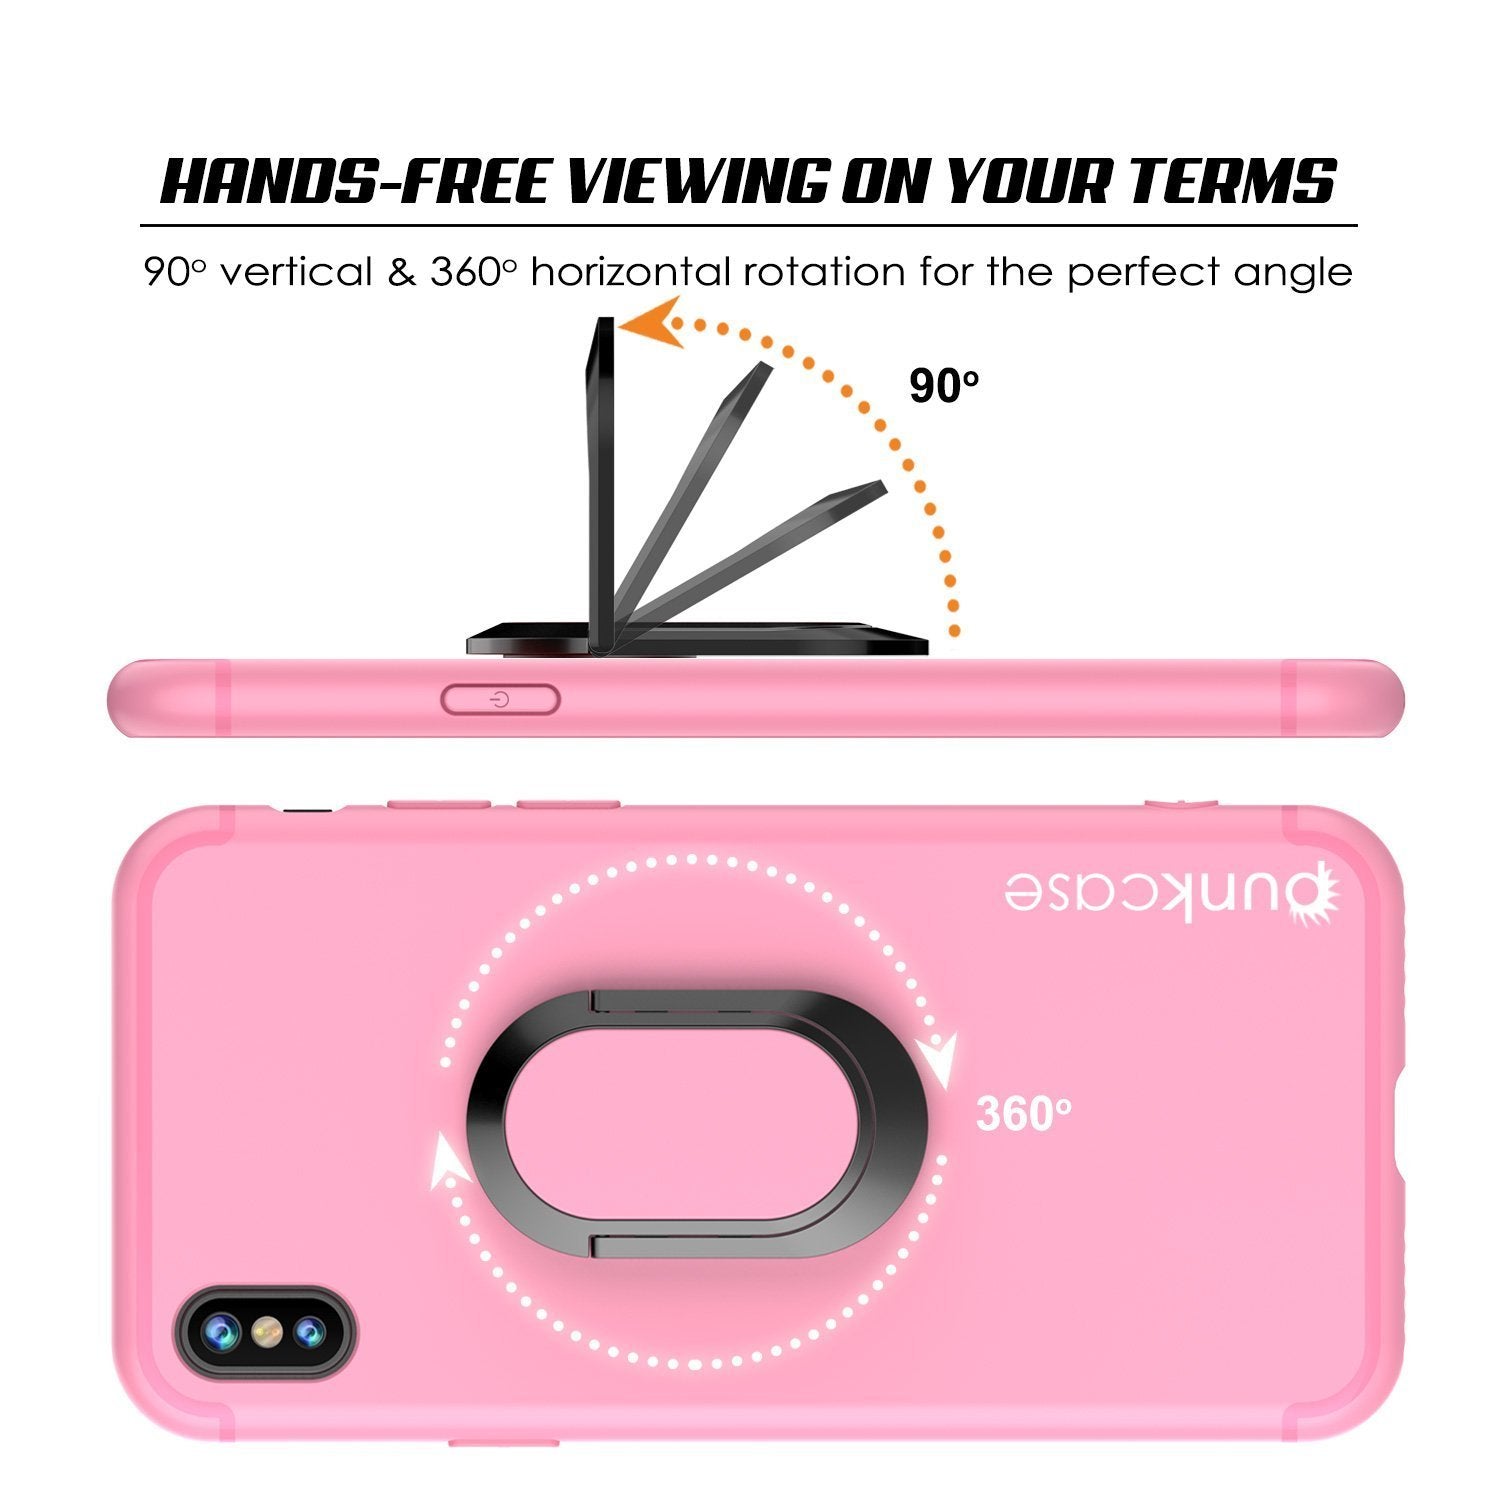 iPhone X Case, Punkcase Magnetix Protective TPU Cover W/ Kickstand, Tempered Glass Screen Protector [Pink]